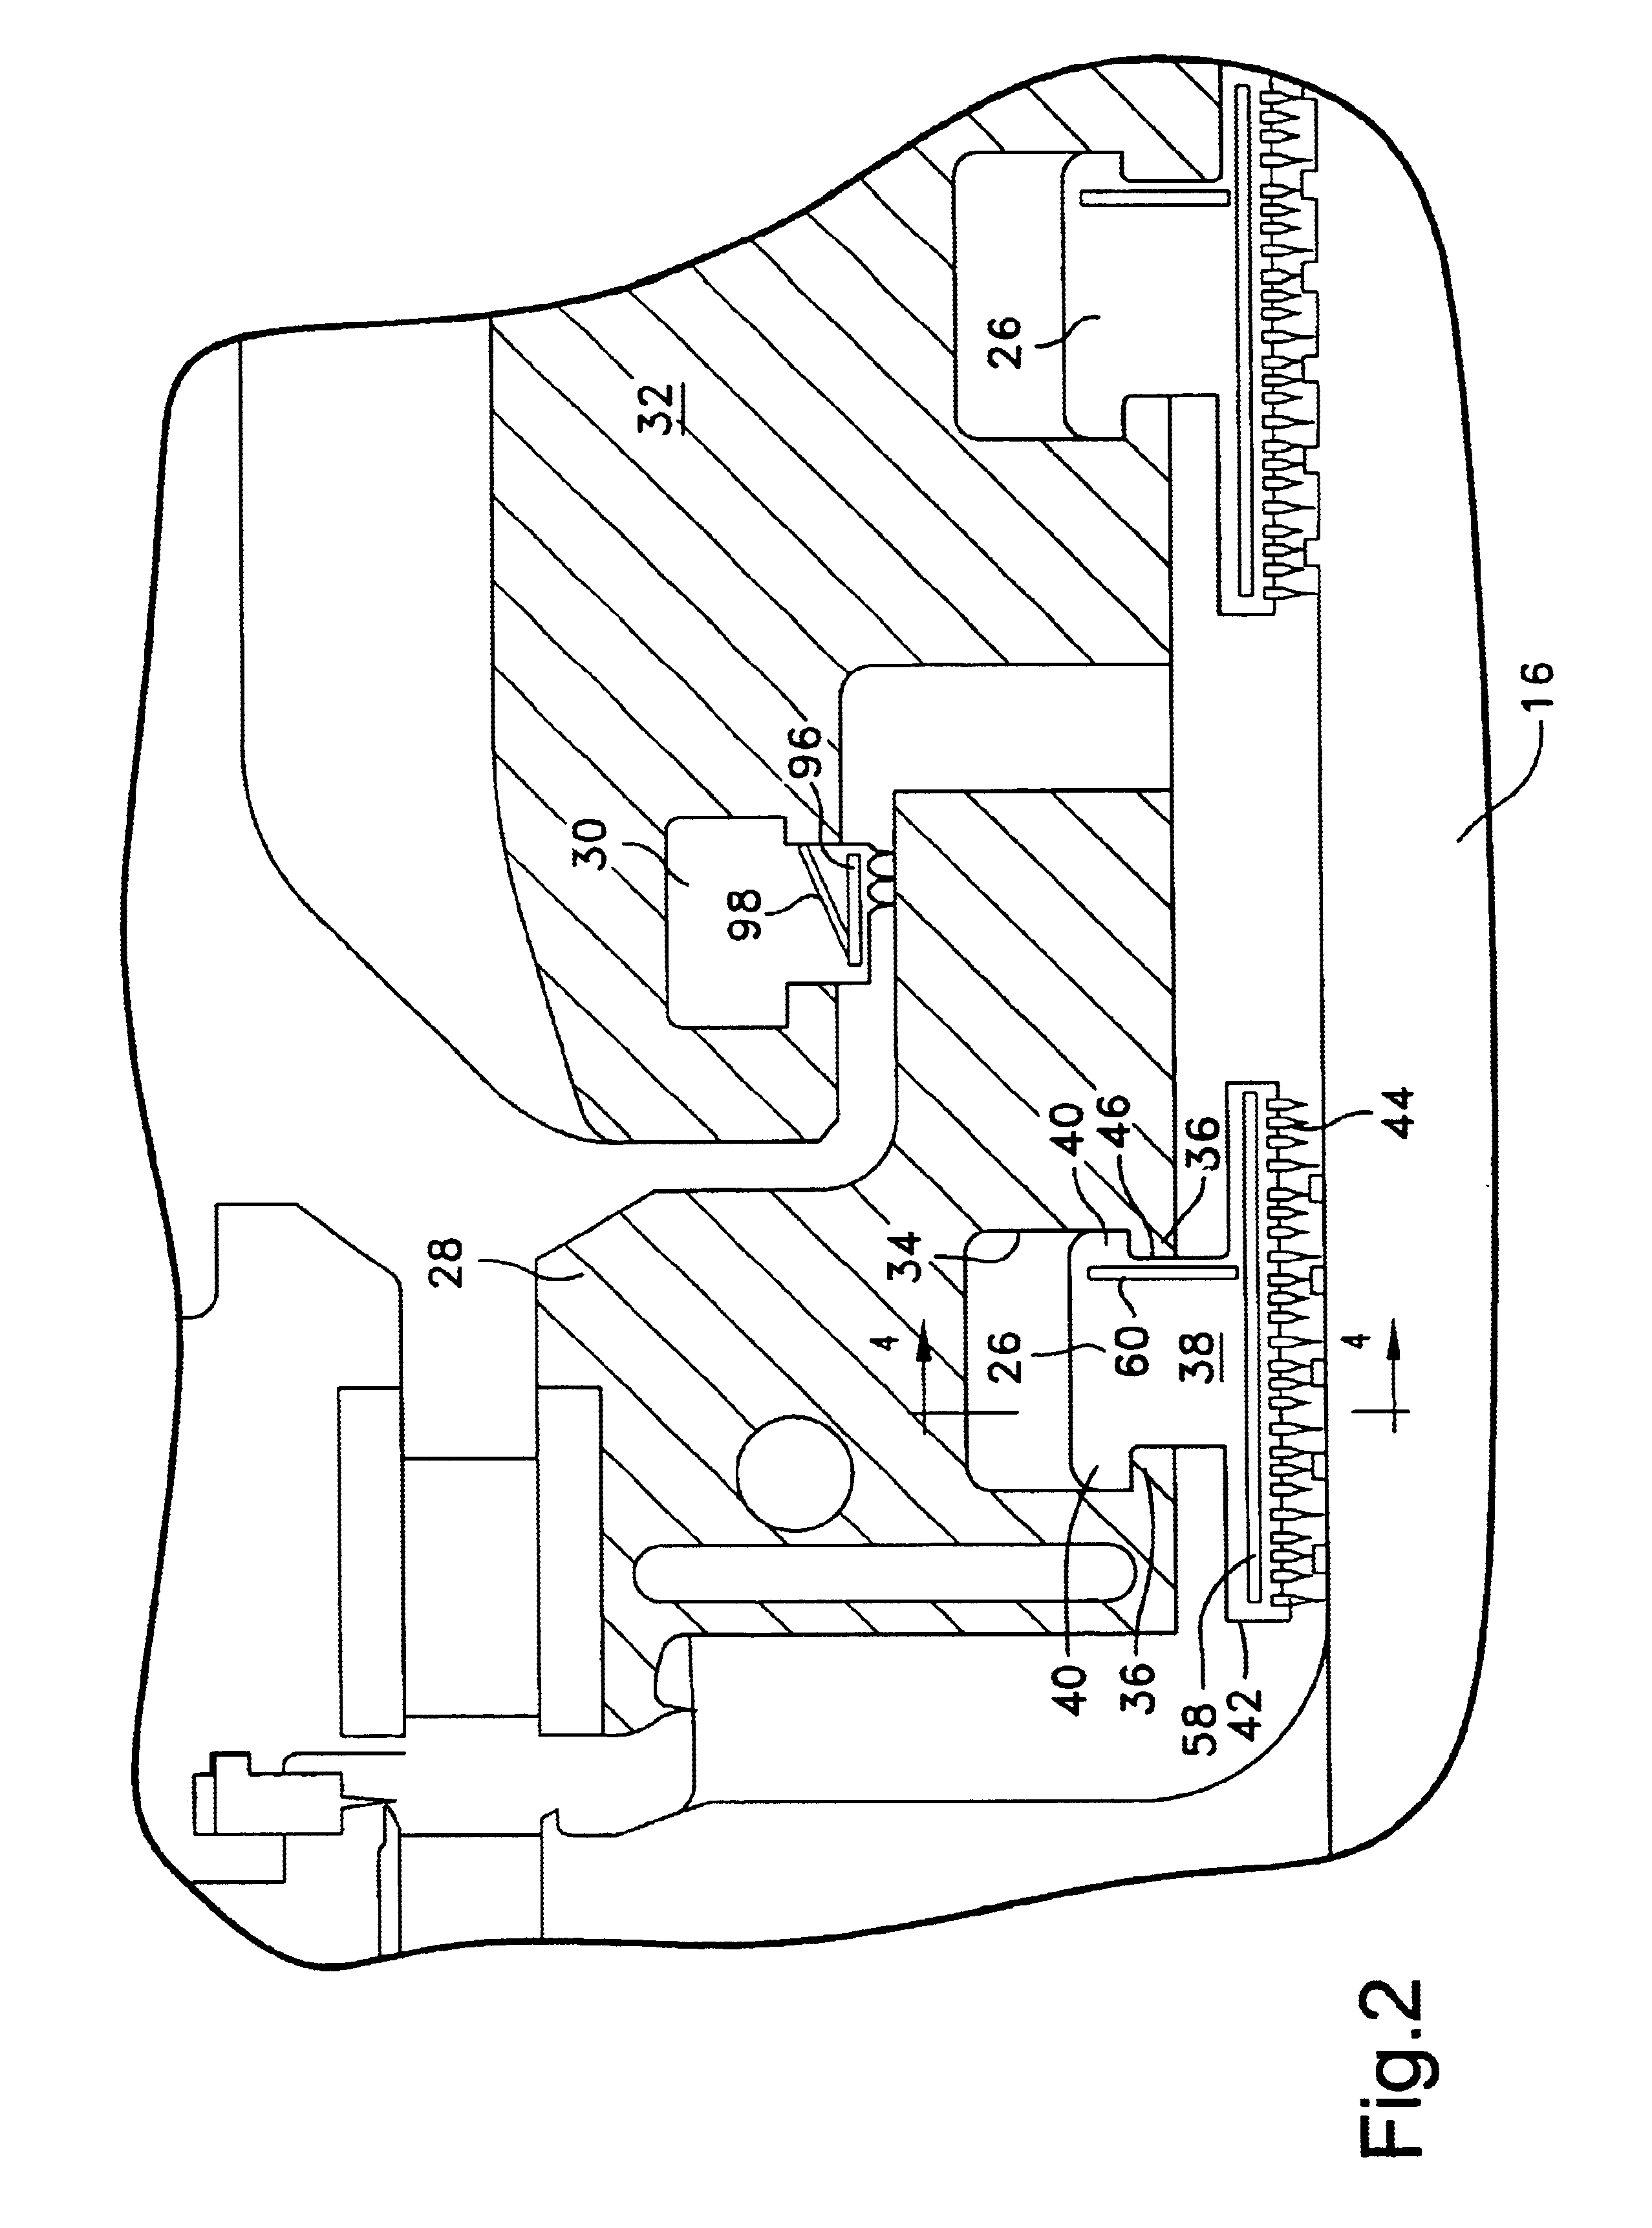 Endface gap sealing of steam turbine packing seal segments and retrofitting thereof